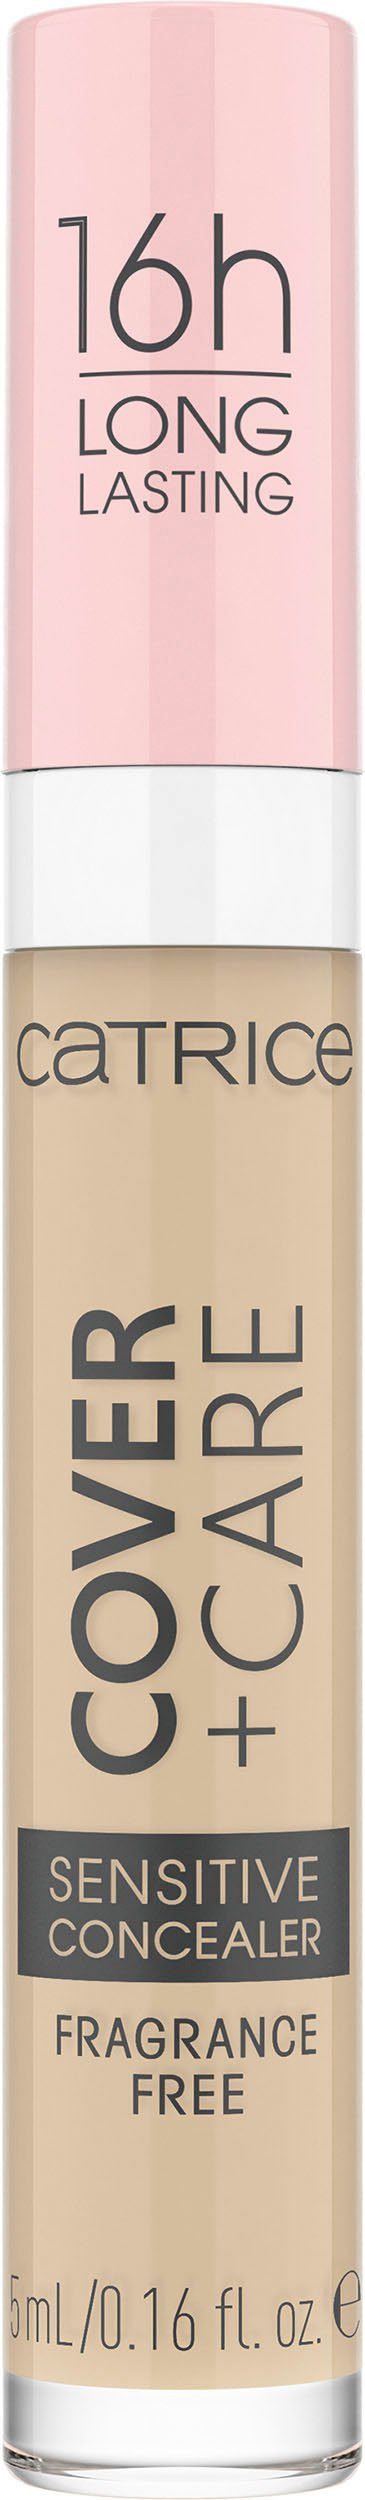 Catrice Concealer 3-tlg. 002N Catrice Care nude Cover Concealer, + Sensitive